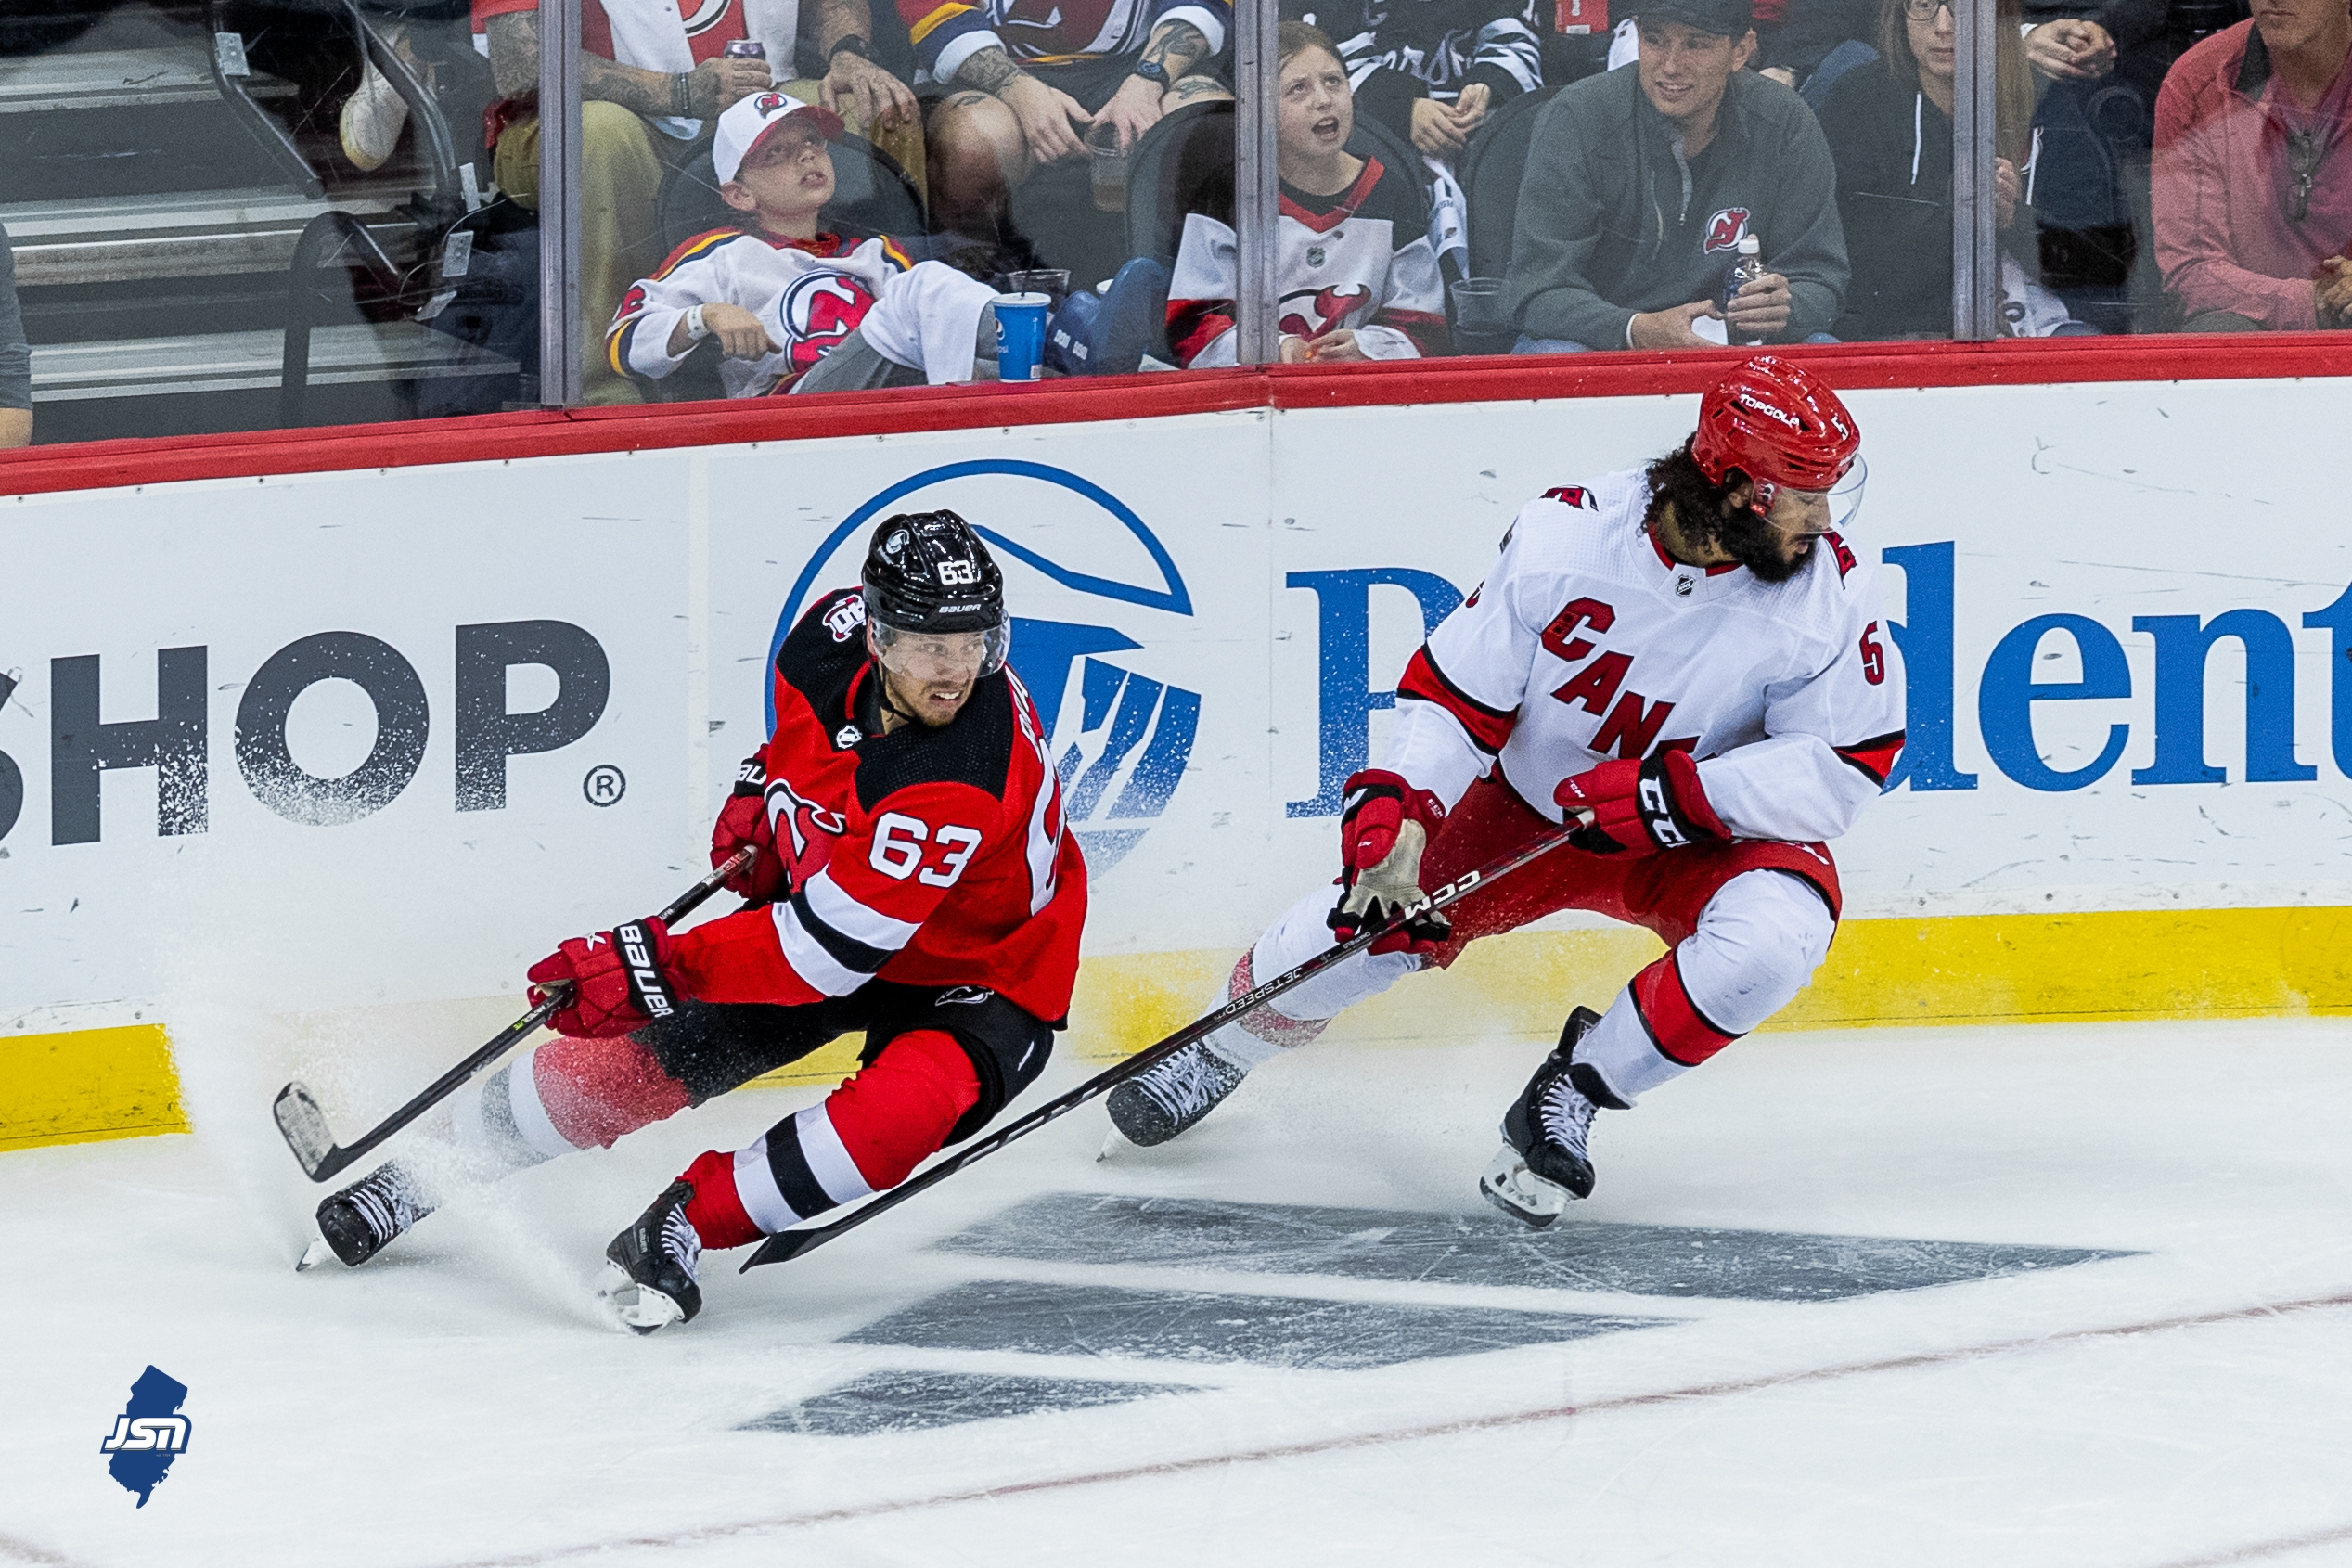 Devils on brink of elimination after beatdown by Hurricanes